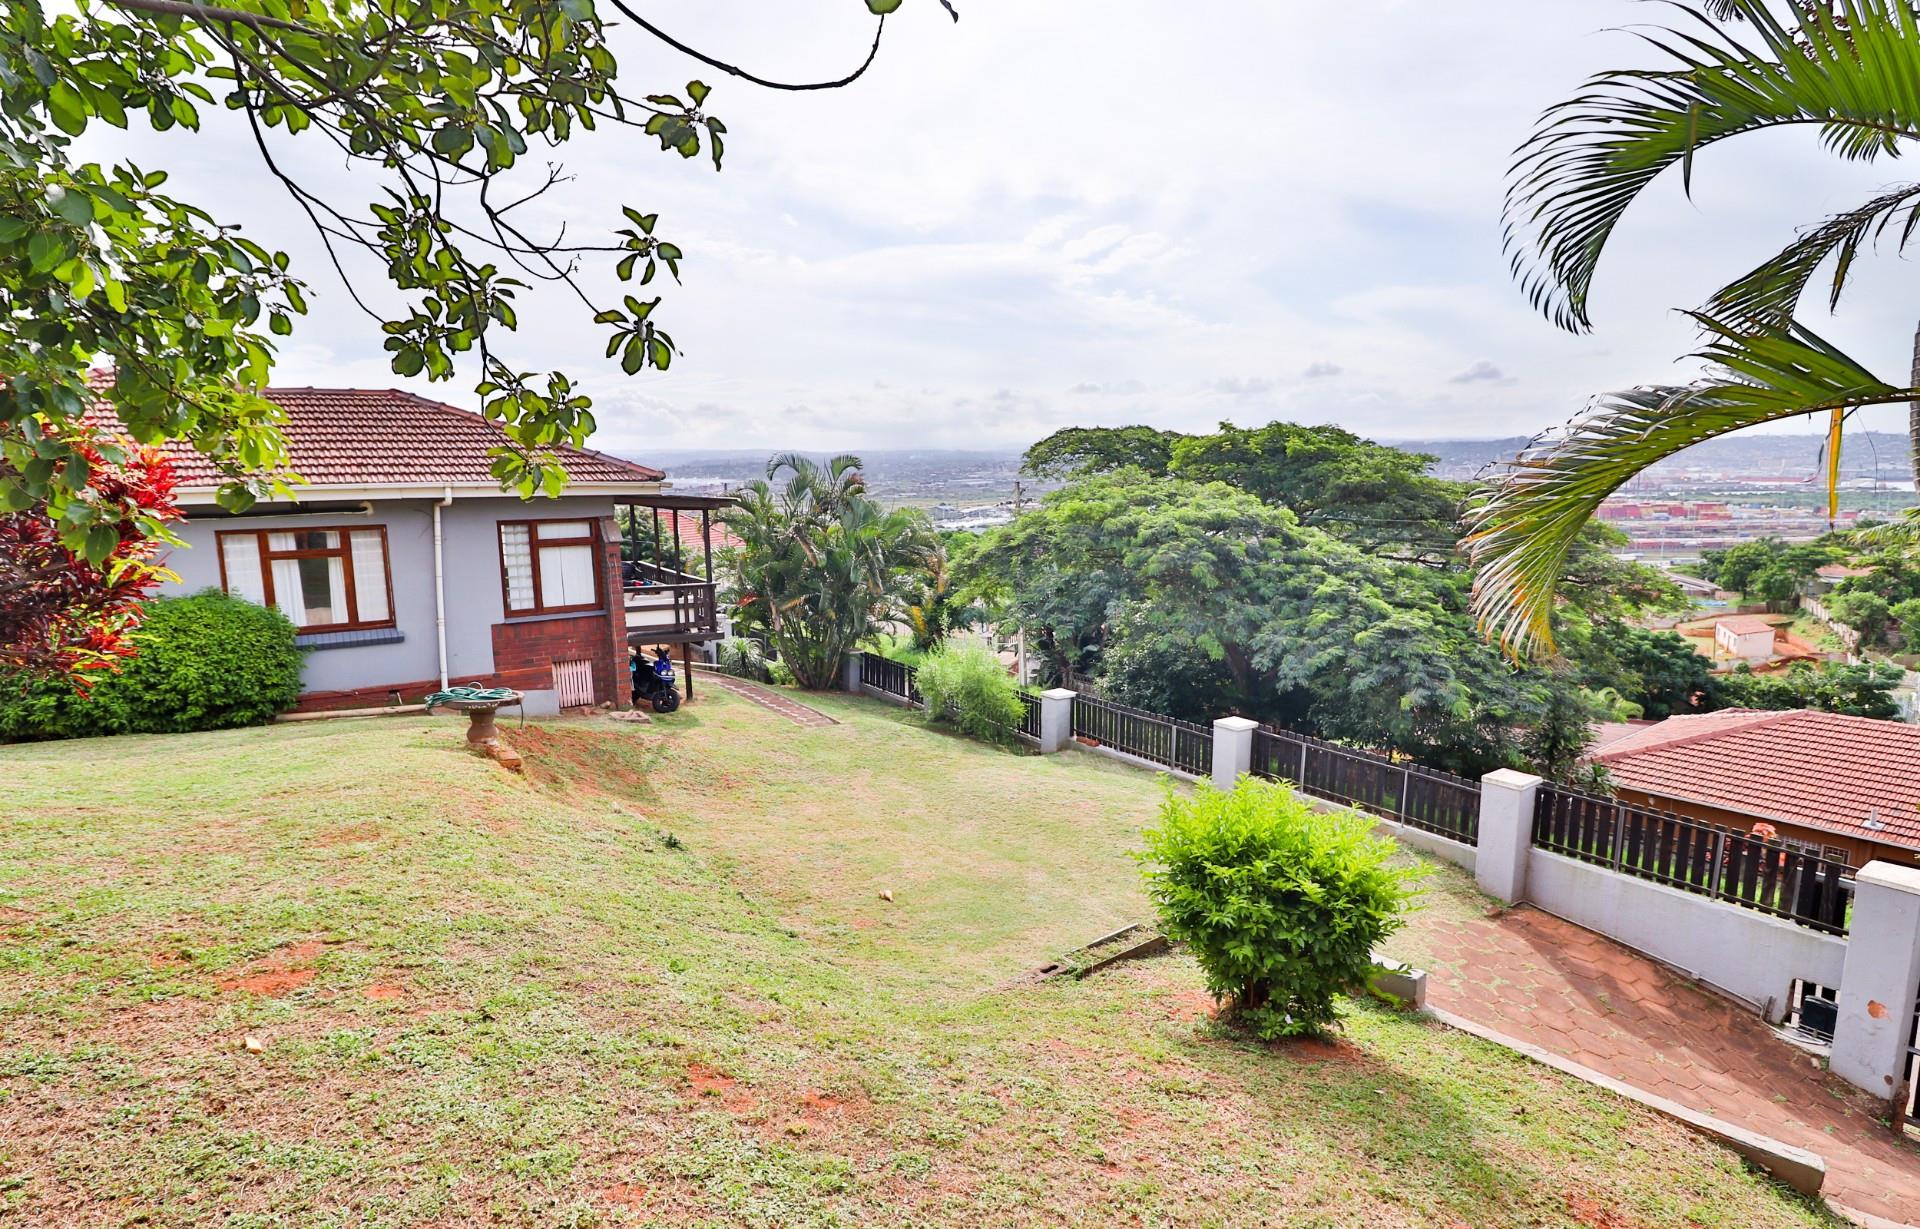 3 Bedroom House For Sale in Bluff | RE/MAX™ of Southern Africa